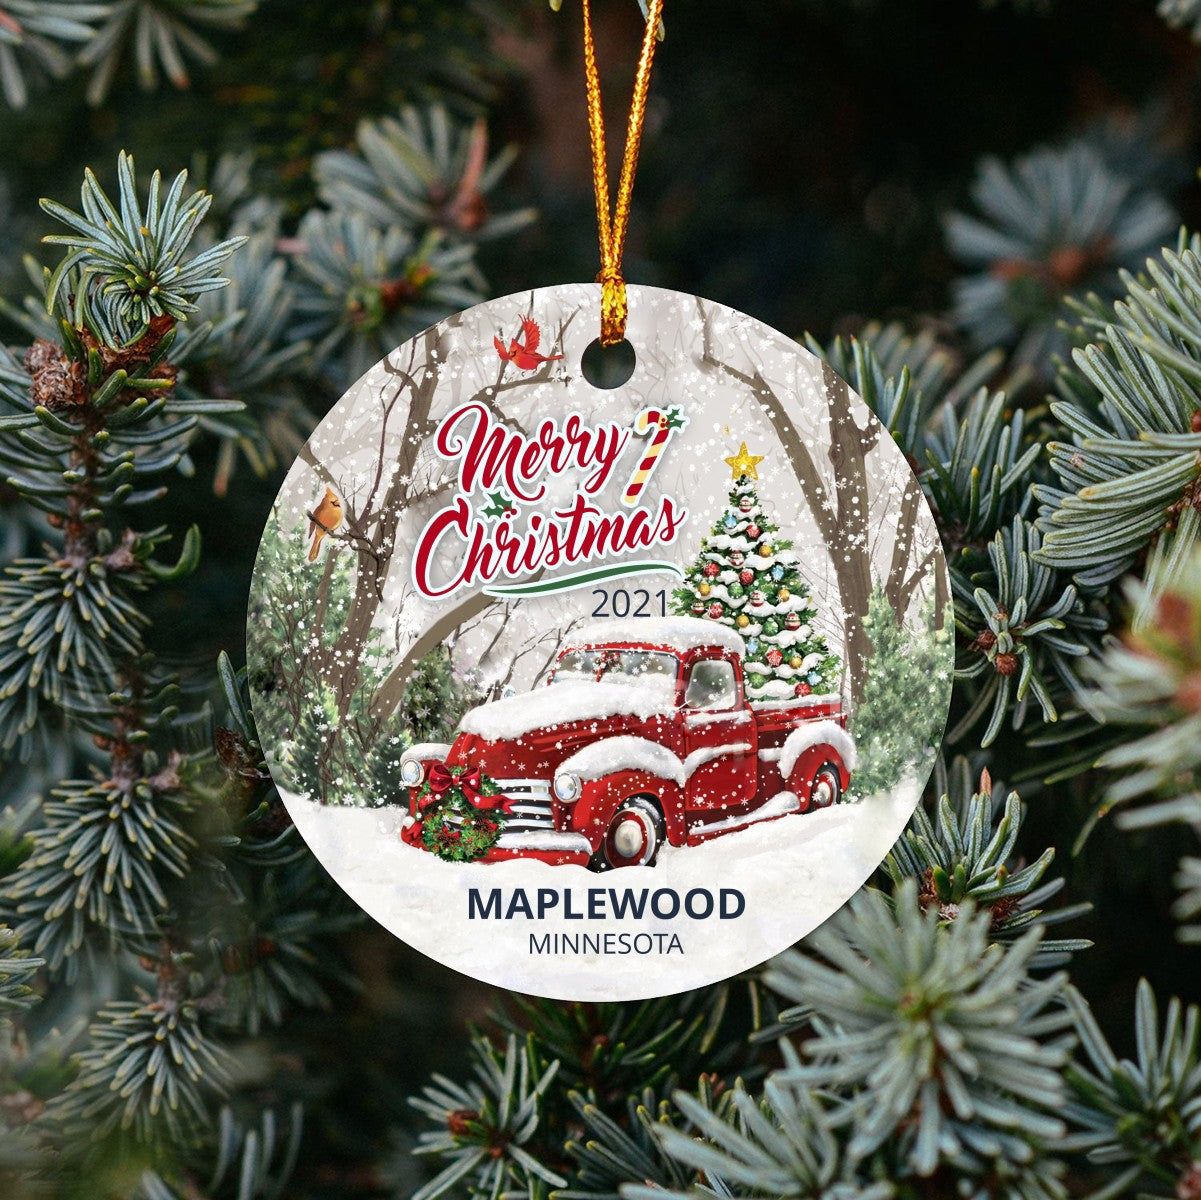 Christmas Tree Ornaments Maplewood - Ornament Customize With Name City And State Maplewood Minnesota MN - Red Truck Xmas Ornaments 3'' Plastic Gift For Family, Friend And Housewarming